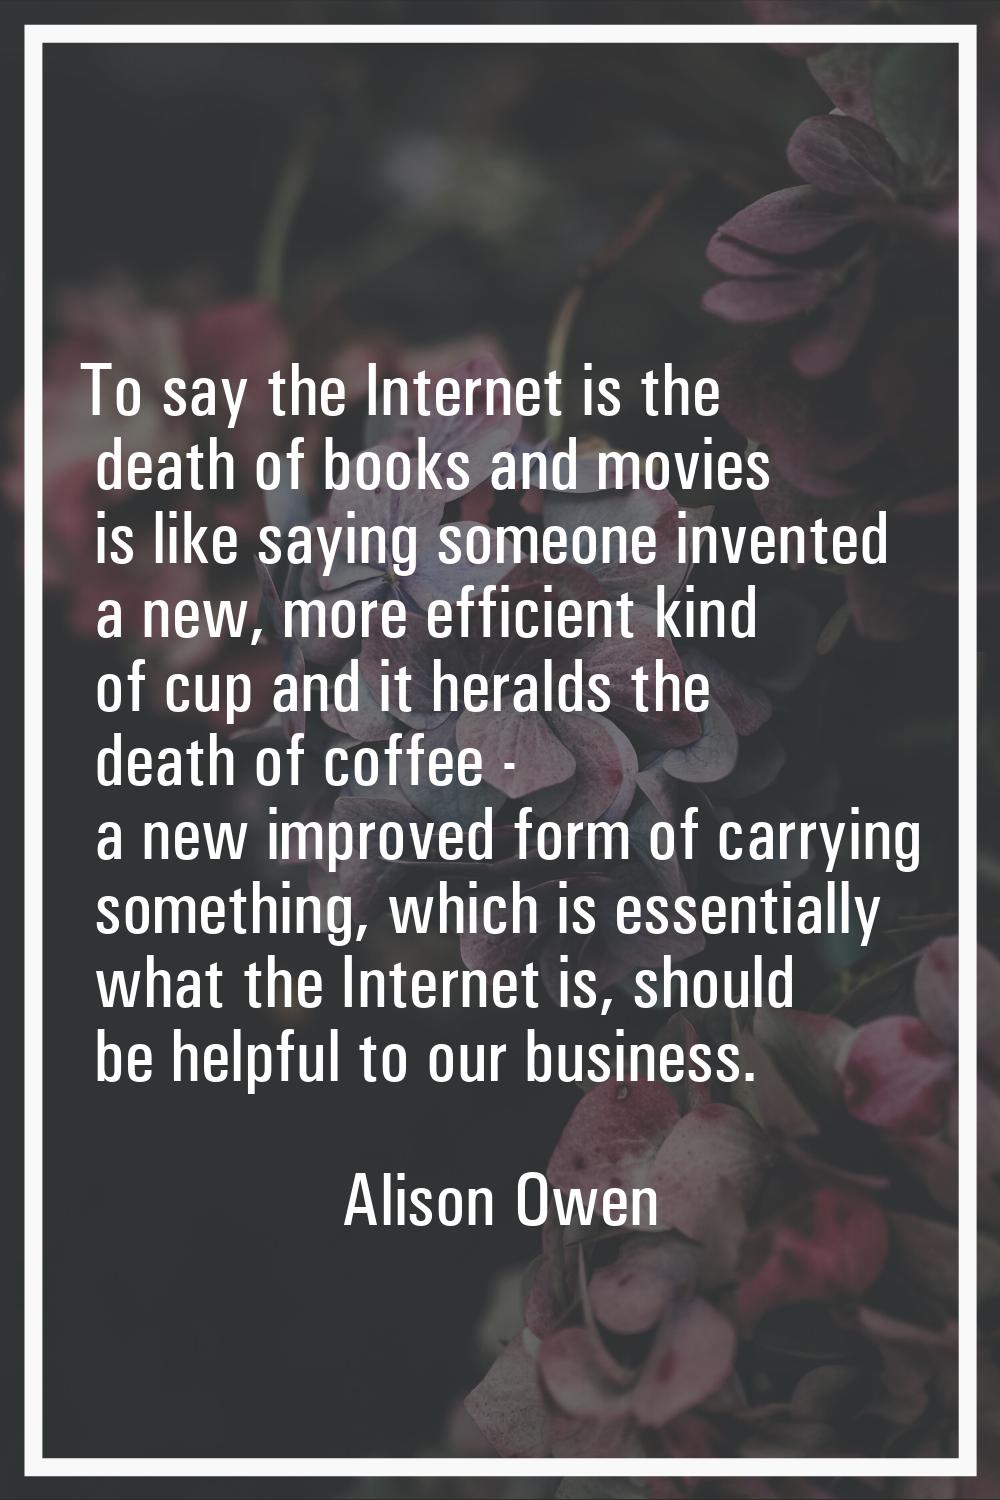 To say the Internet is the death of books and movies is like saying someone invented a new, more ef